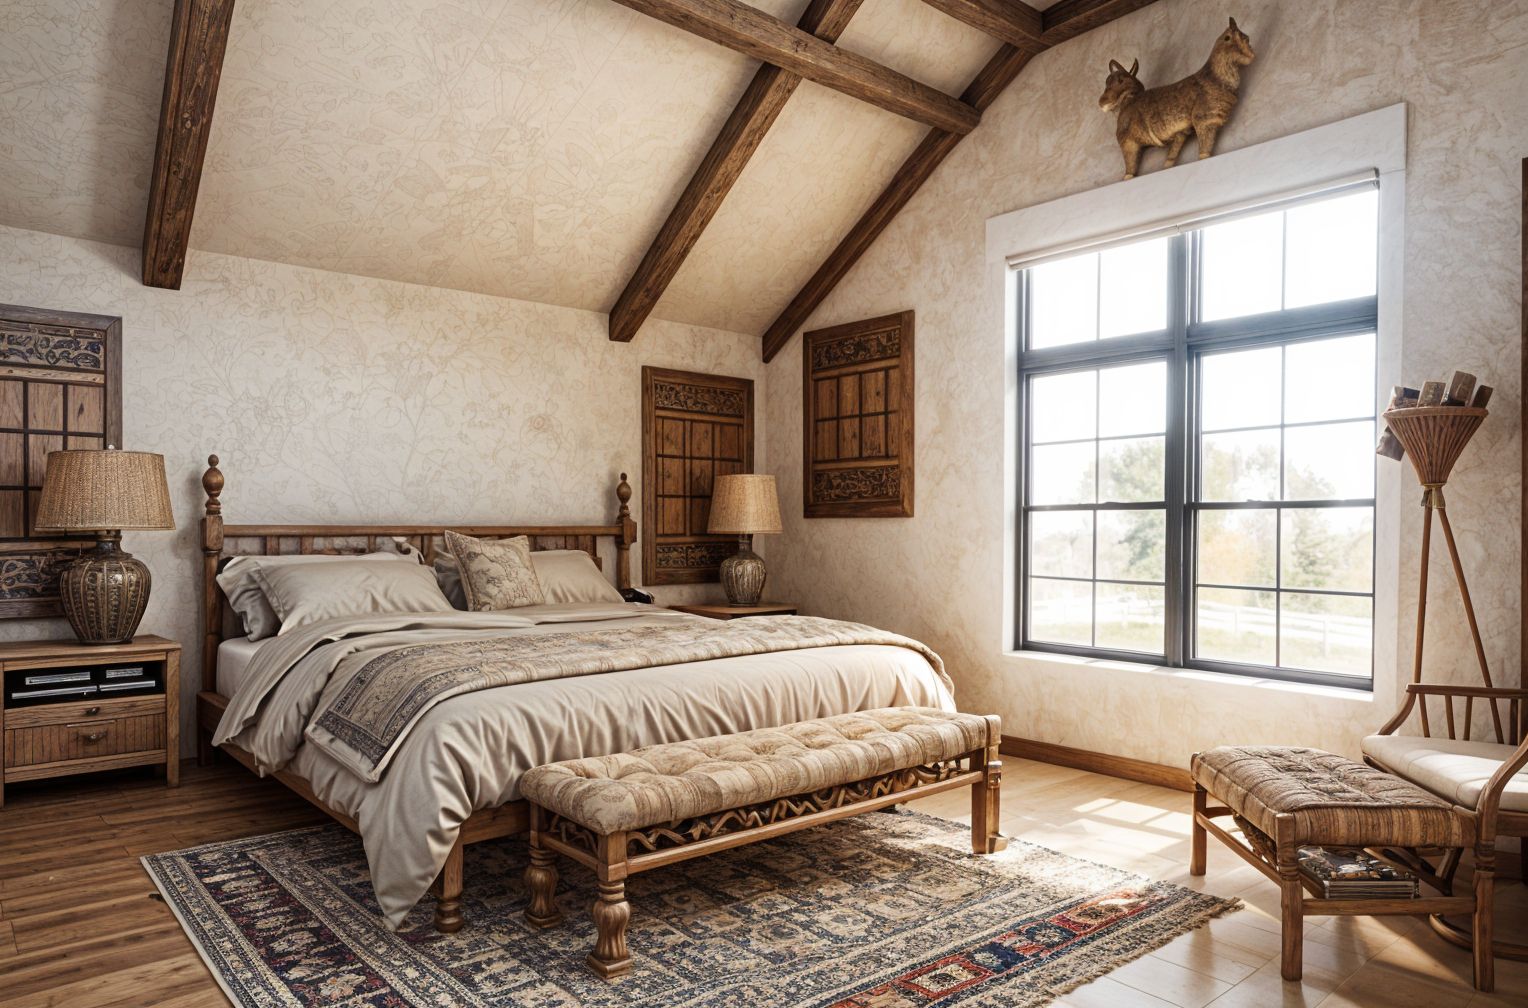 Tribal Guest Room